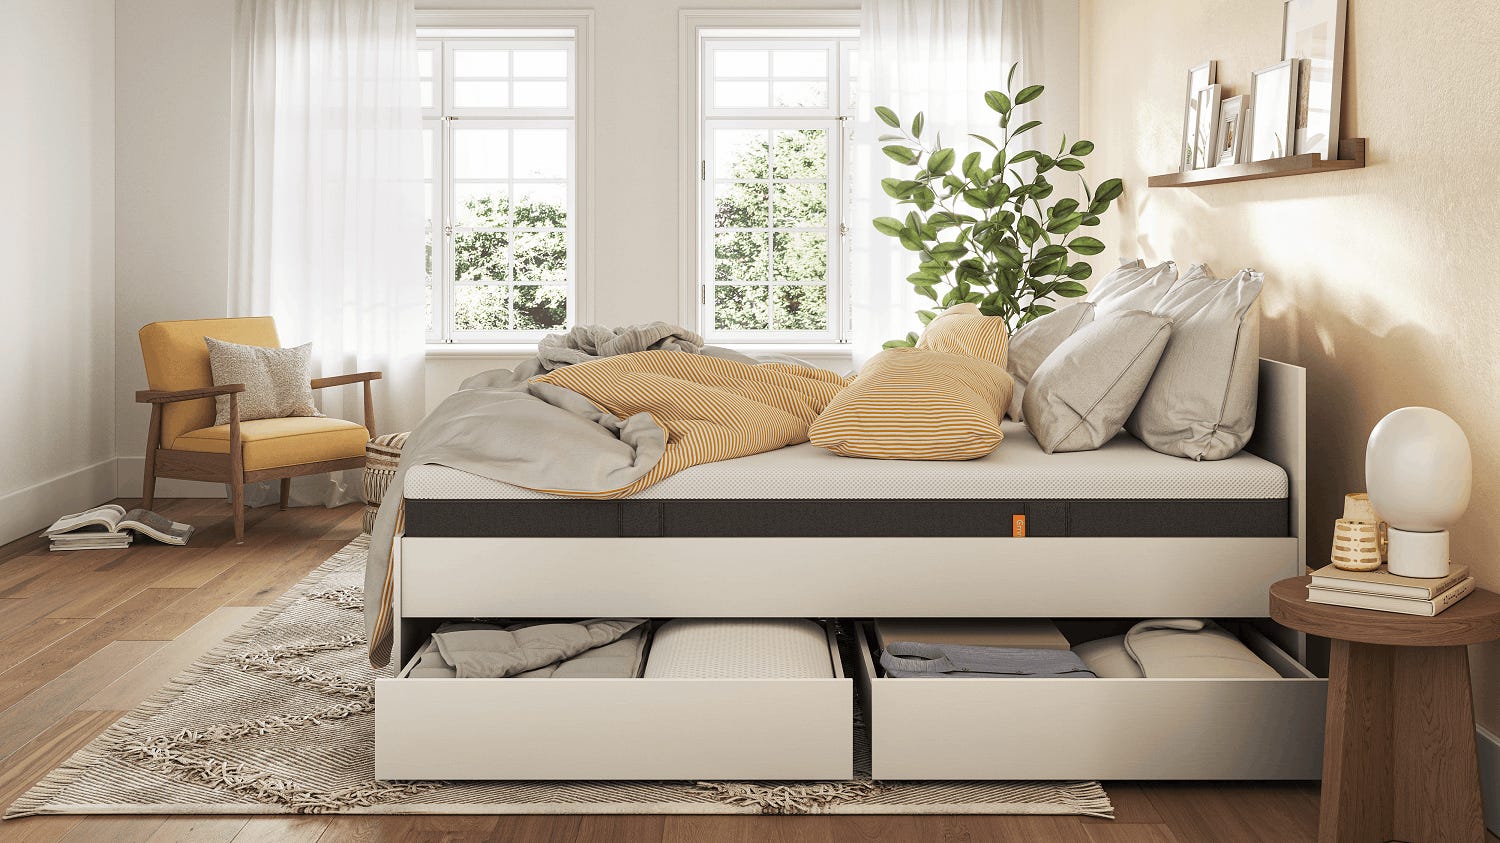 White-wooden-bed-drawers